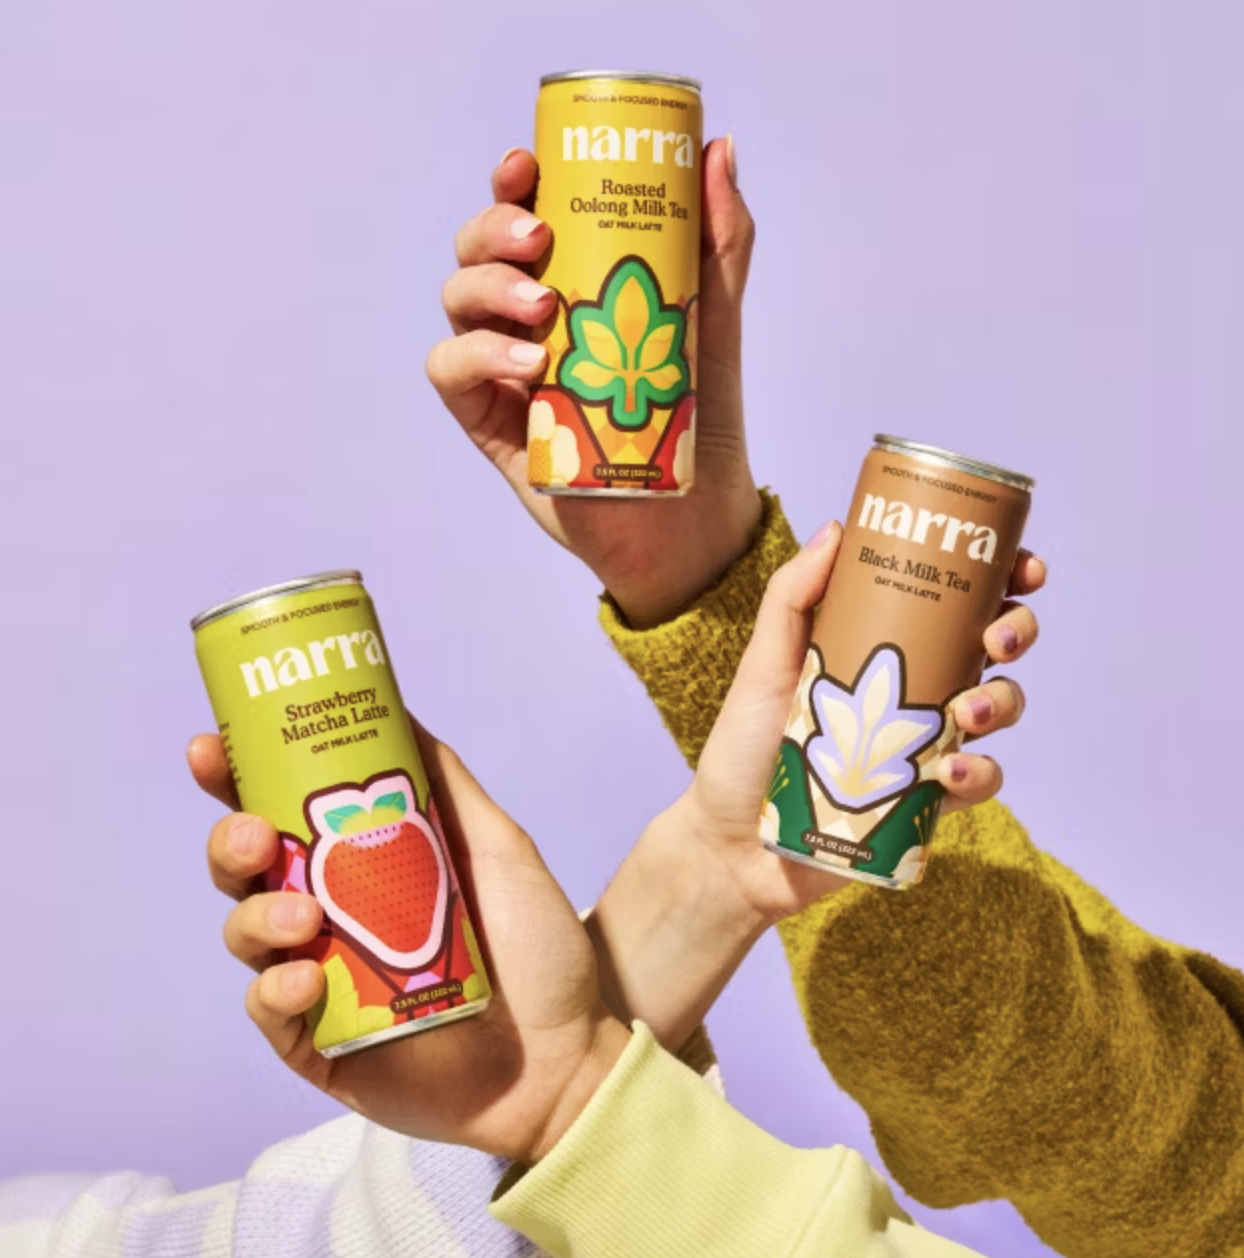 Three models holding cans of Narra